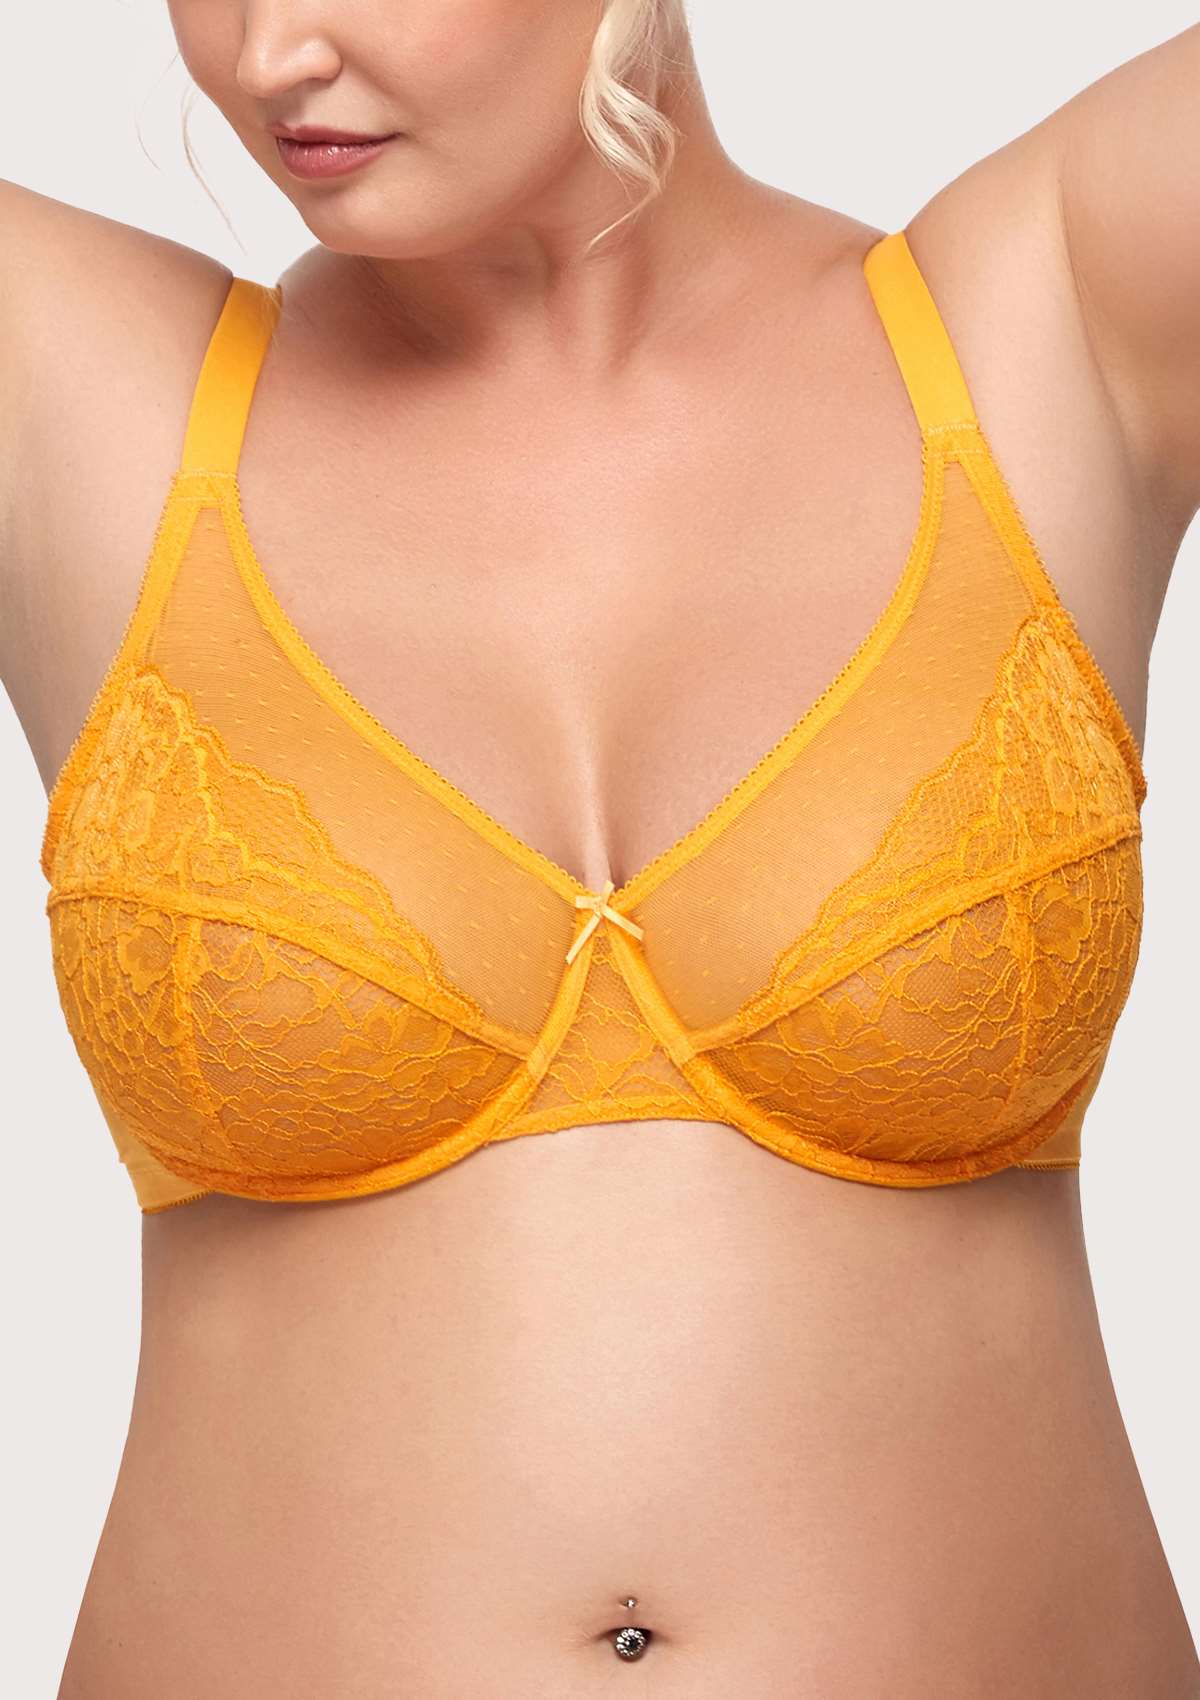 HSIA Enchante Bra And Panty Sets: Unpadded Bra With Back Support - Cadmium Yellow / 44 / C